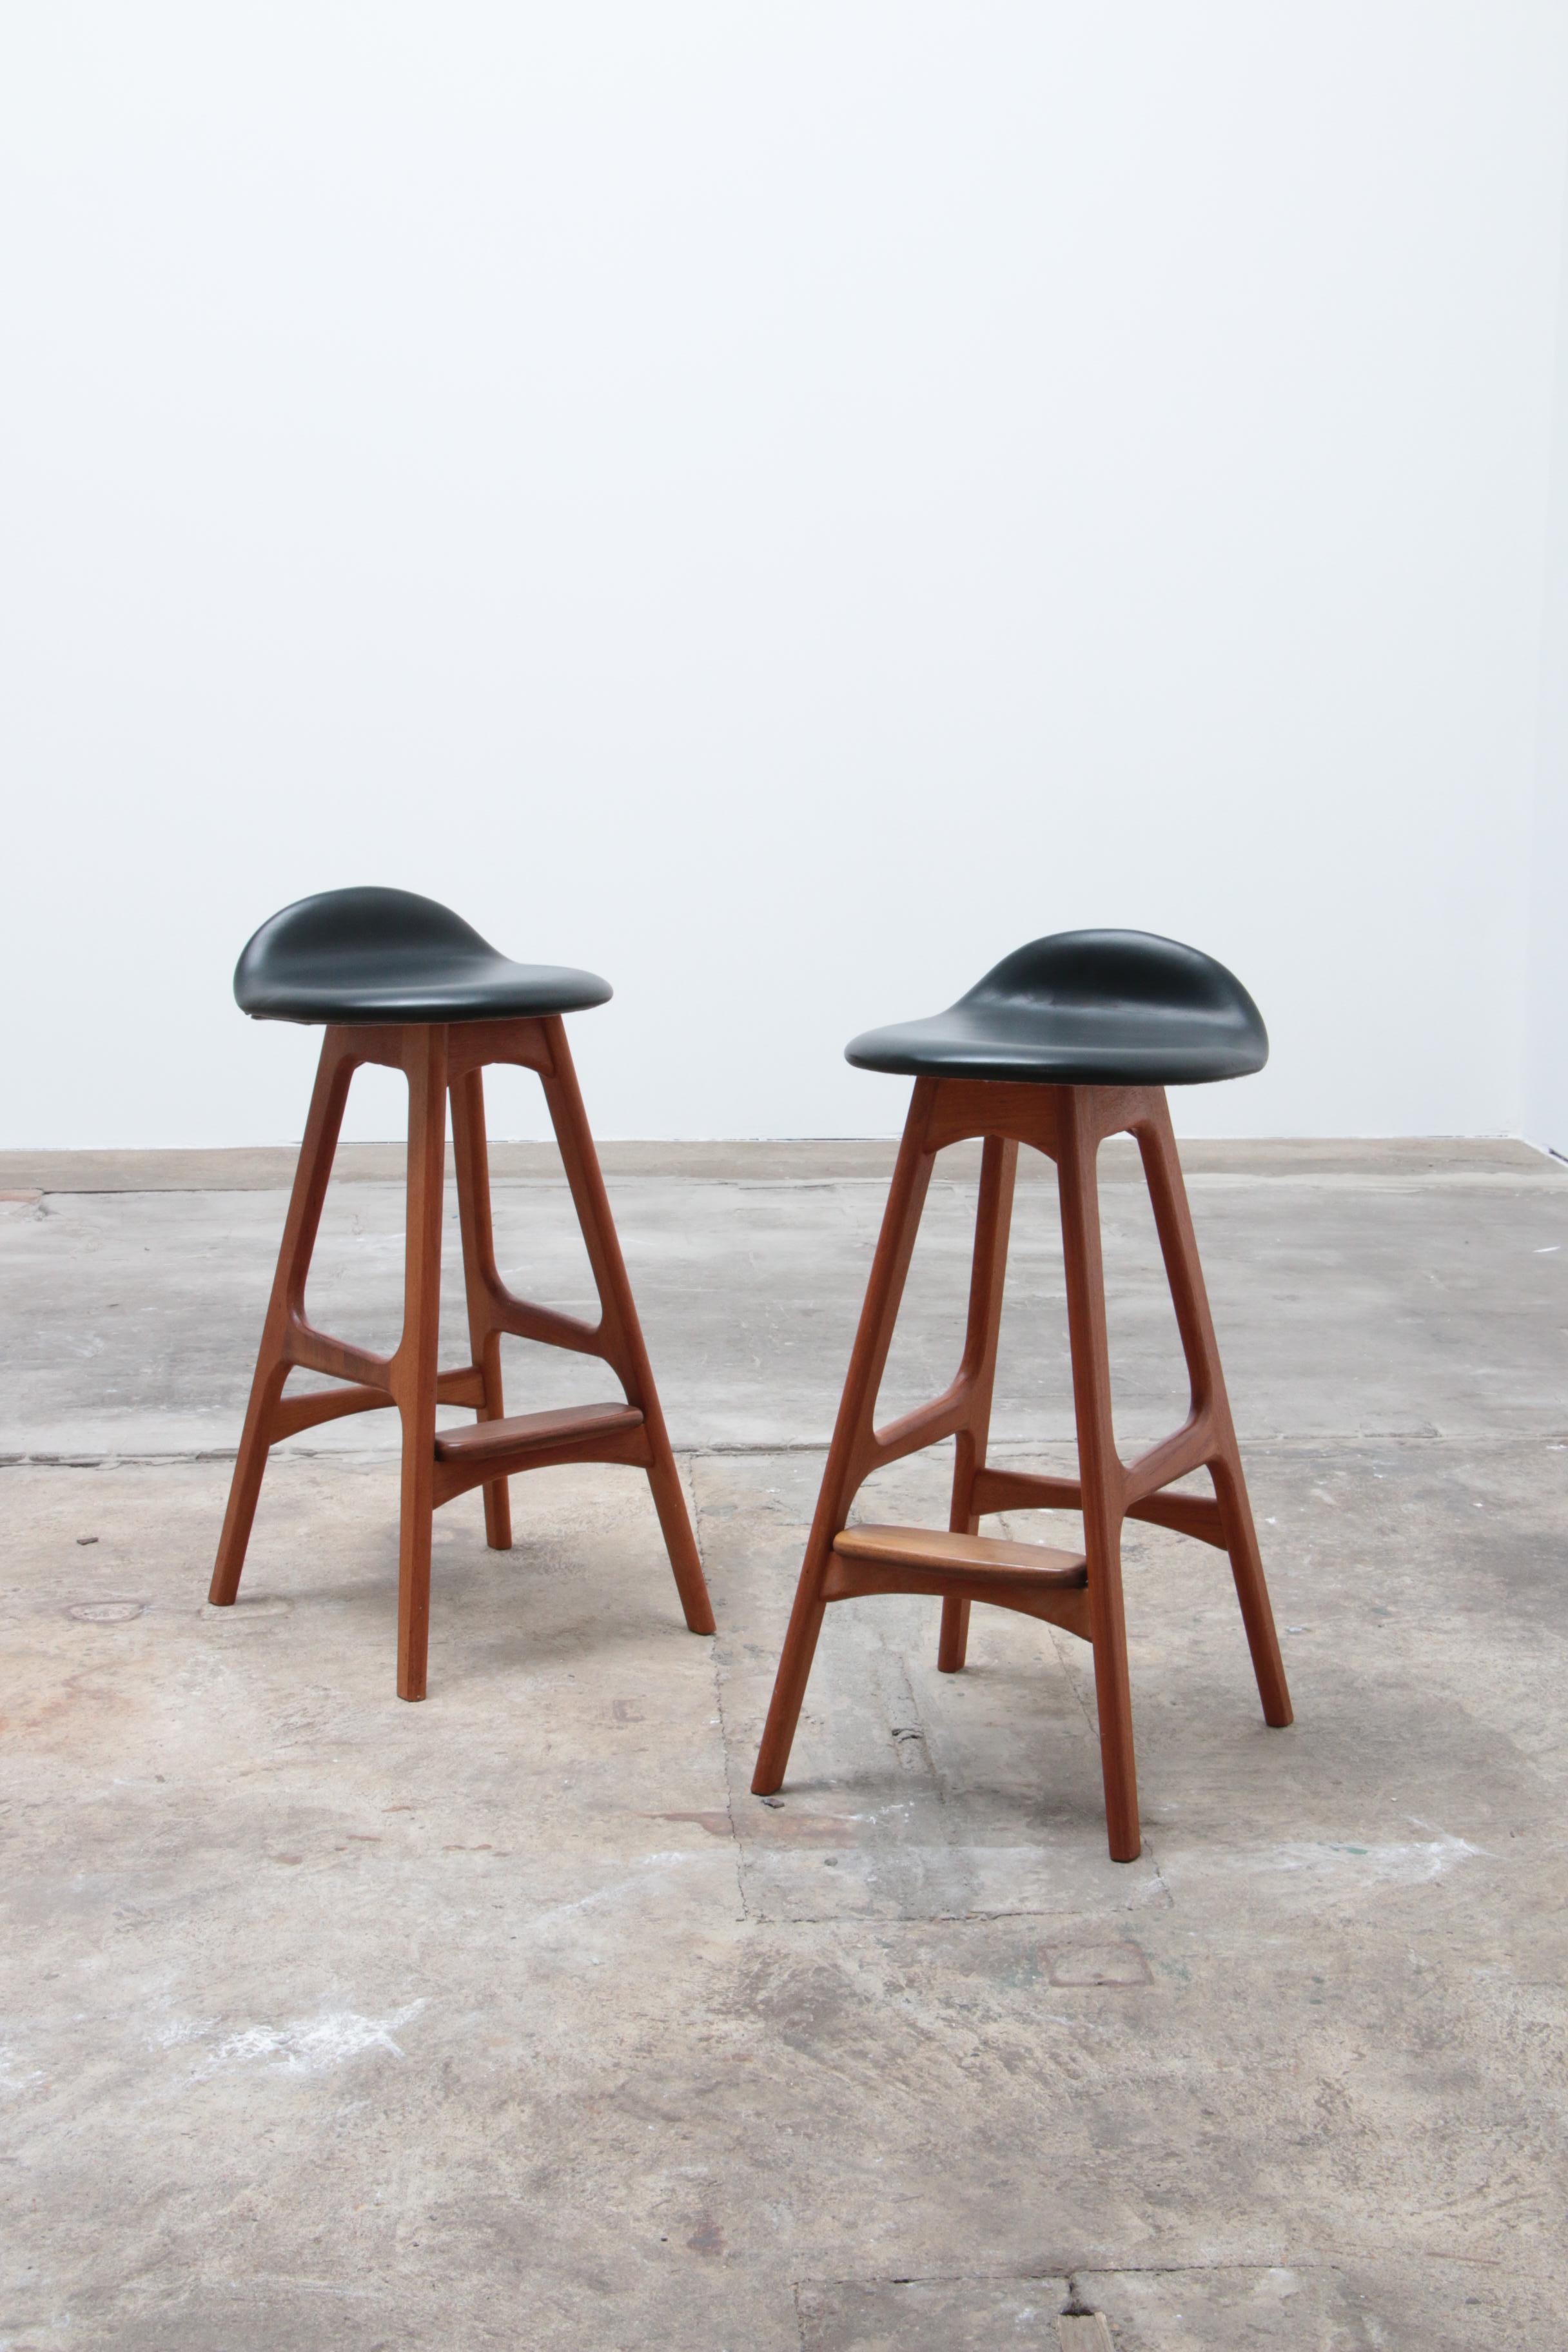 This set of 2 bar stools was designed by Erik Buch and produced by O.D. Mobler in Denmark.

There is a label from the manufacturer.

In our opinion, this is the most elegant, practical, comfortable and most beautiful bar stool ever made.

The